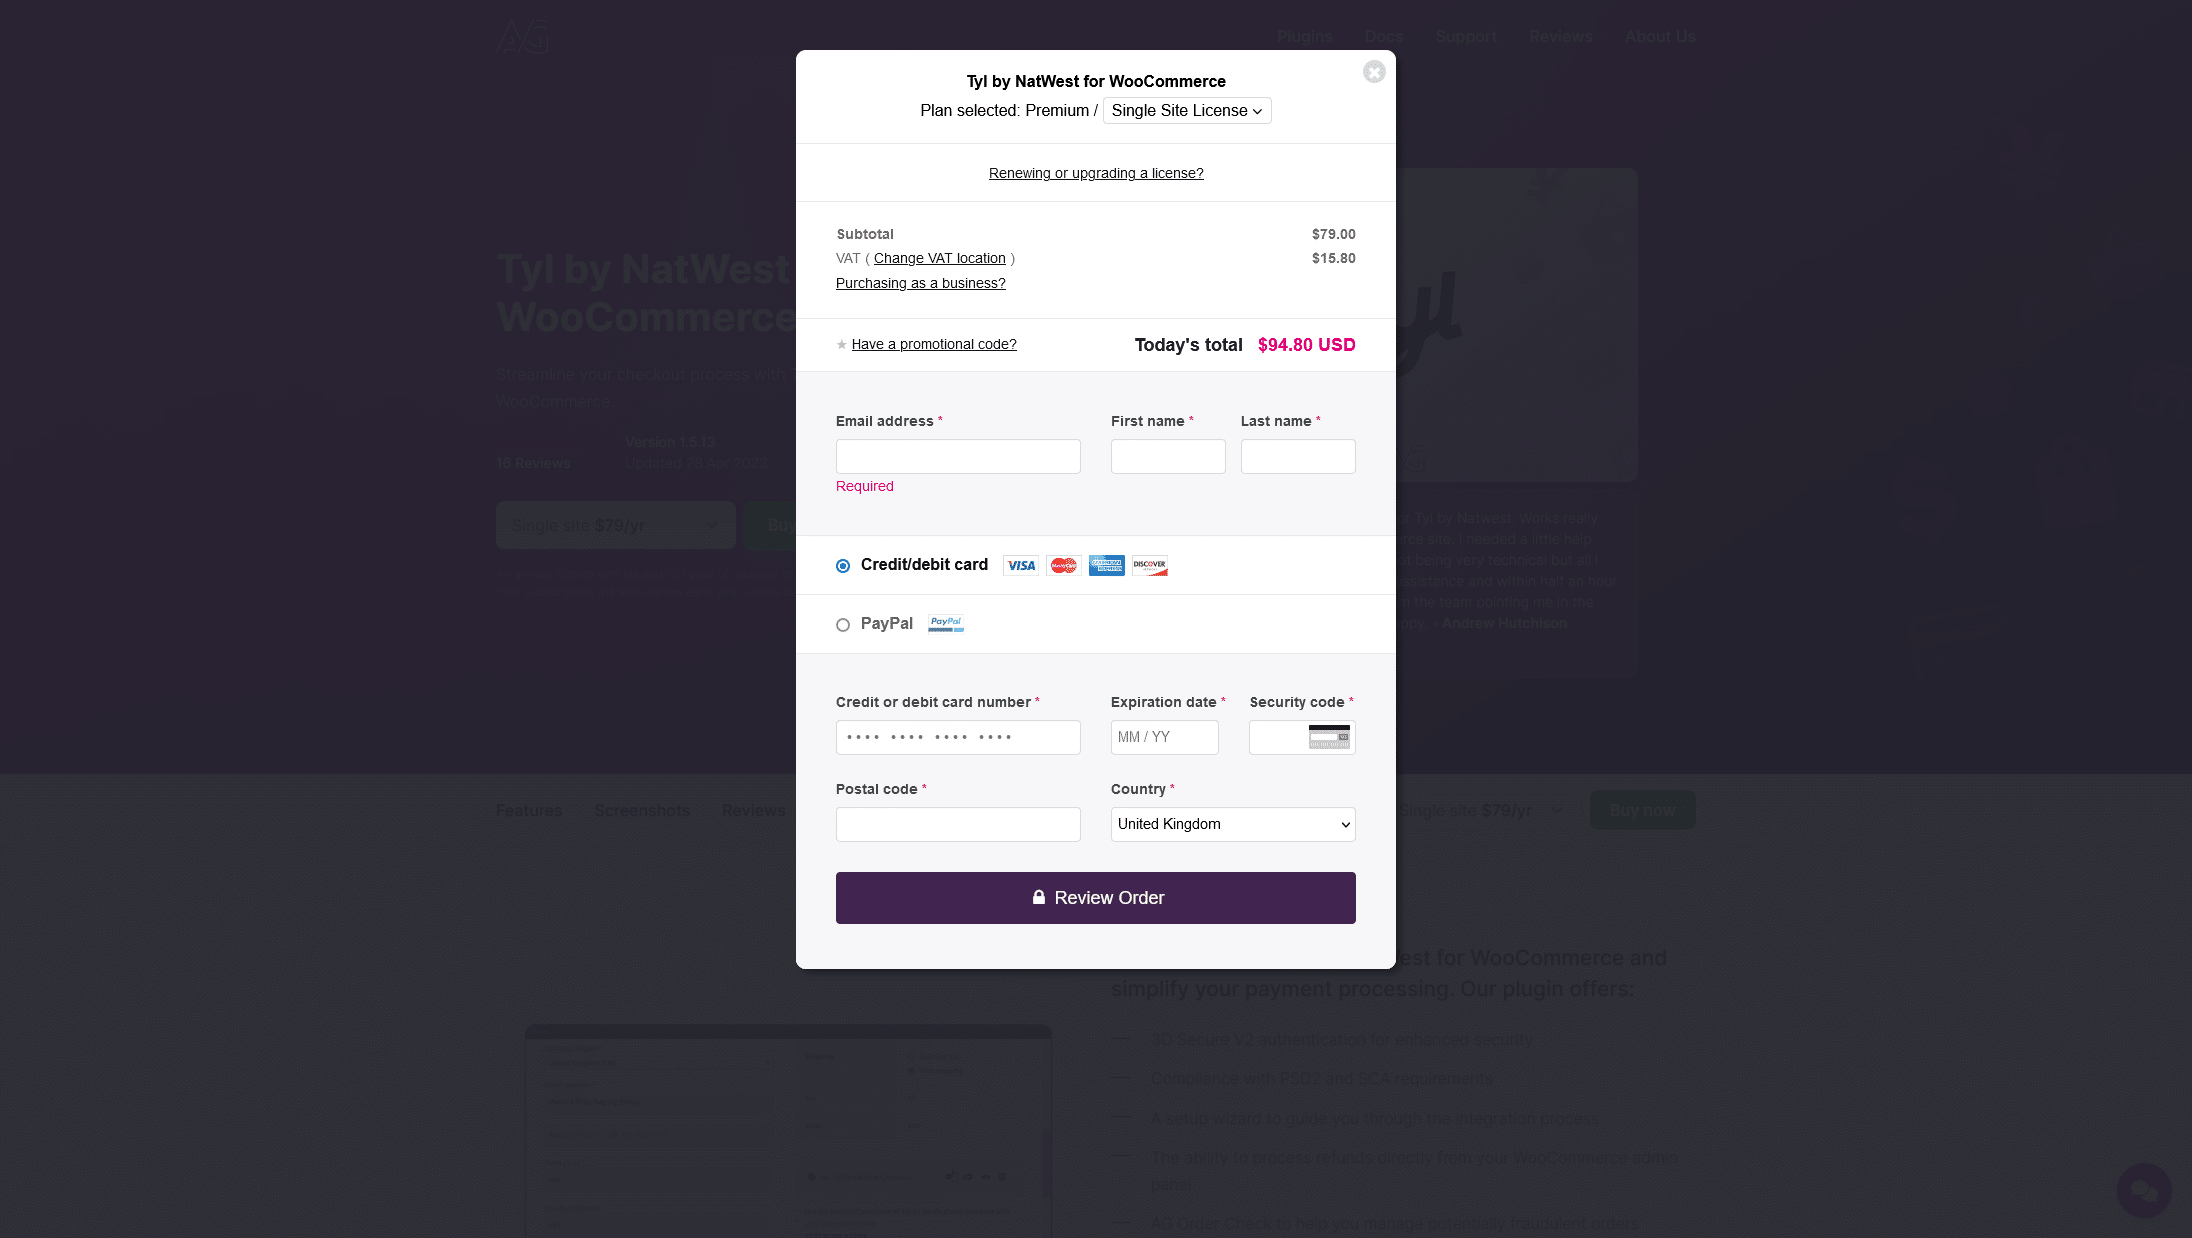 How to Provide First Order Discount in WooCommerce - Detailed Examples